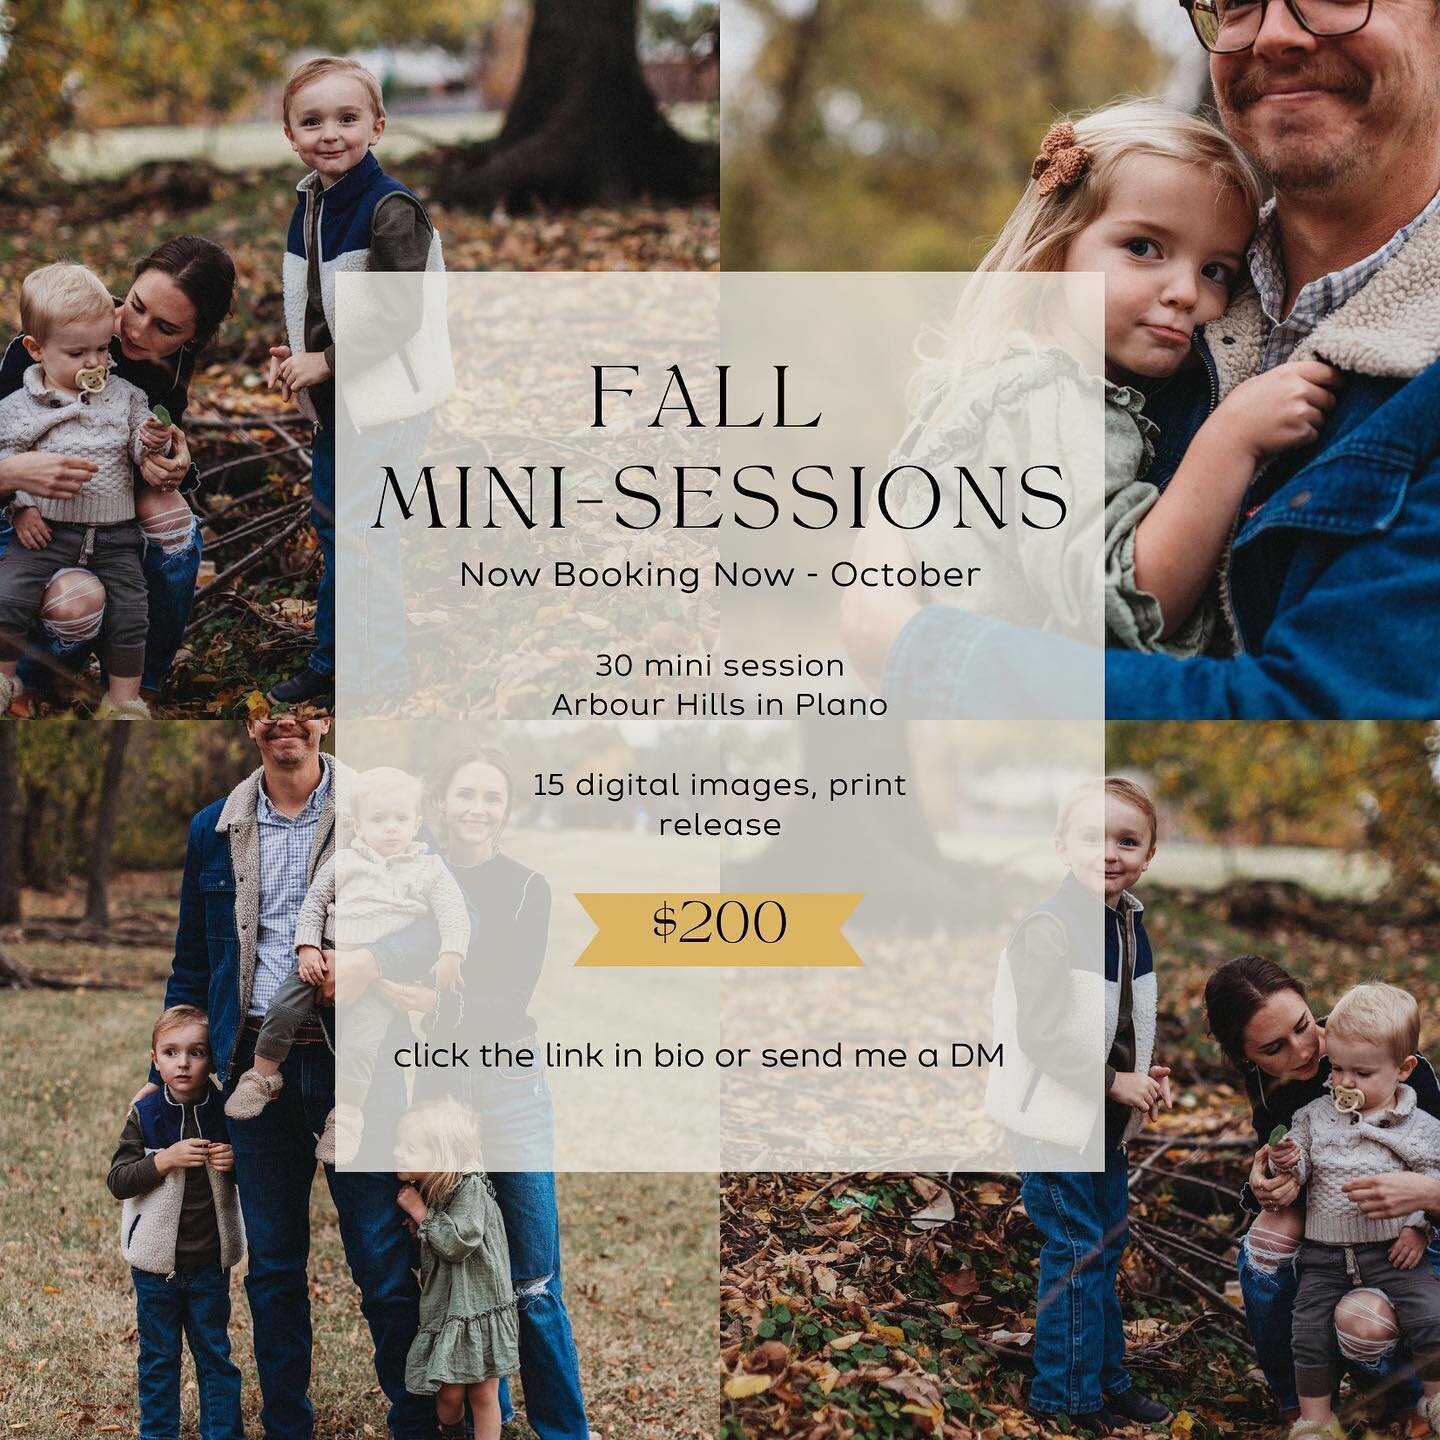 It&rsquo;s mini session time the weekends of oct 28 and nov 4 😍

✨These mini sessions are for: 

💕Families and expecting mamas who want to capture this moment forever. No milestones required :) 

✨ Business owners who want quick, outdoorsy headshot